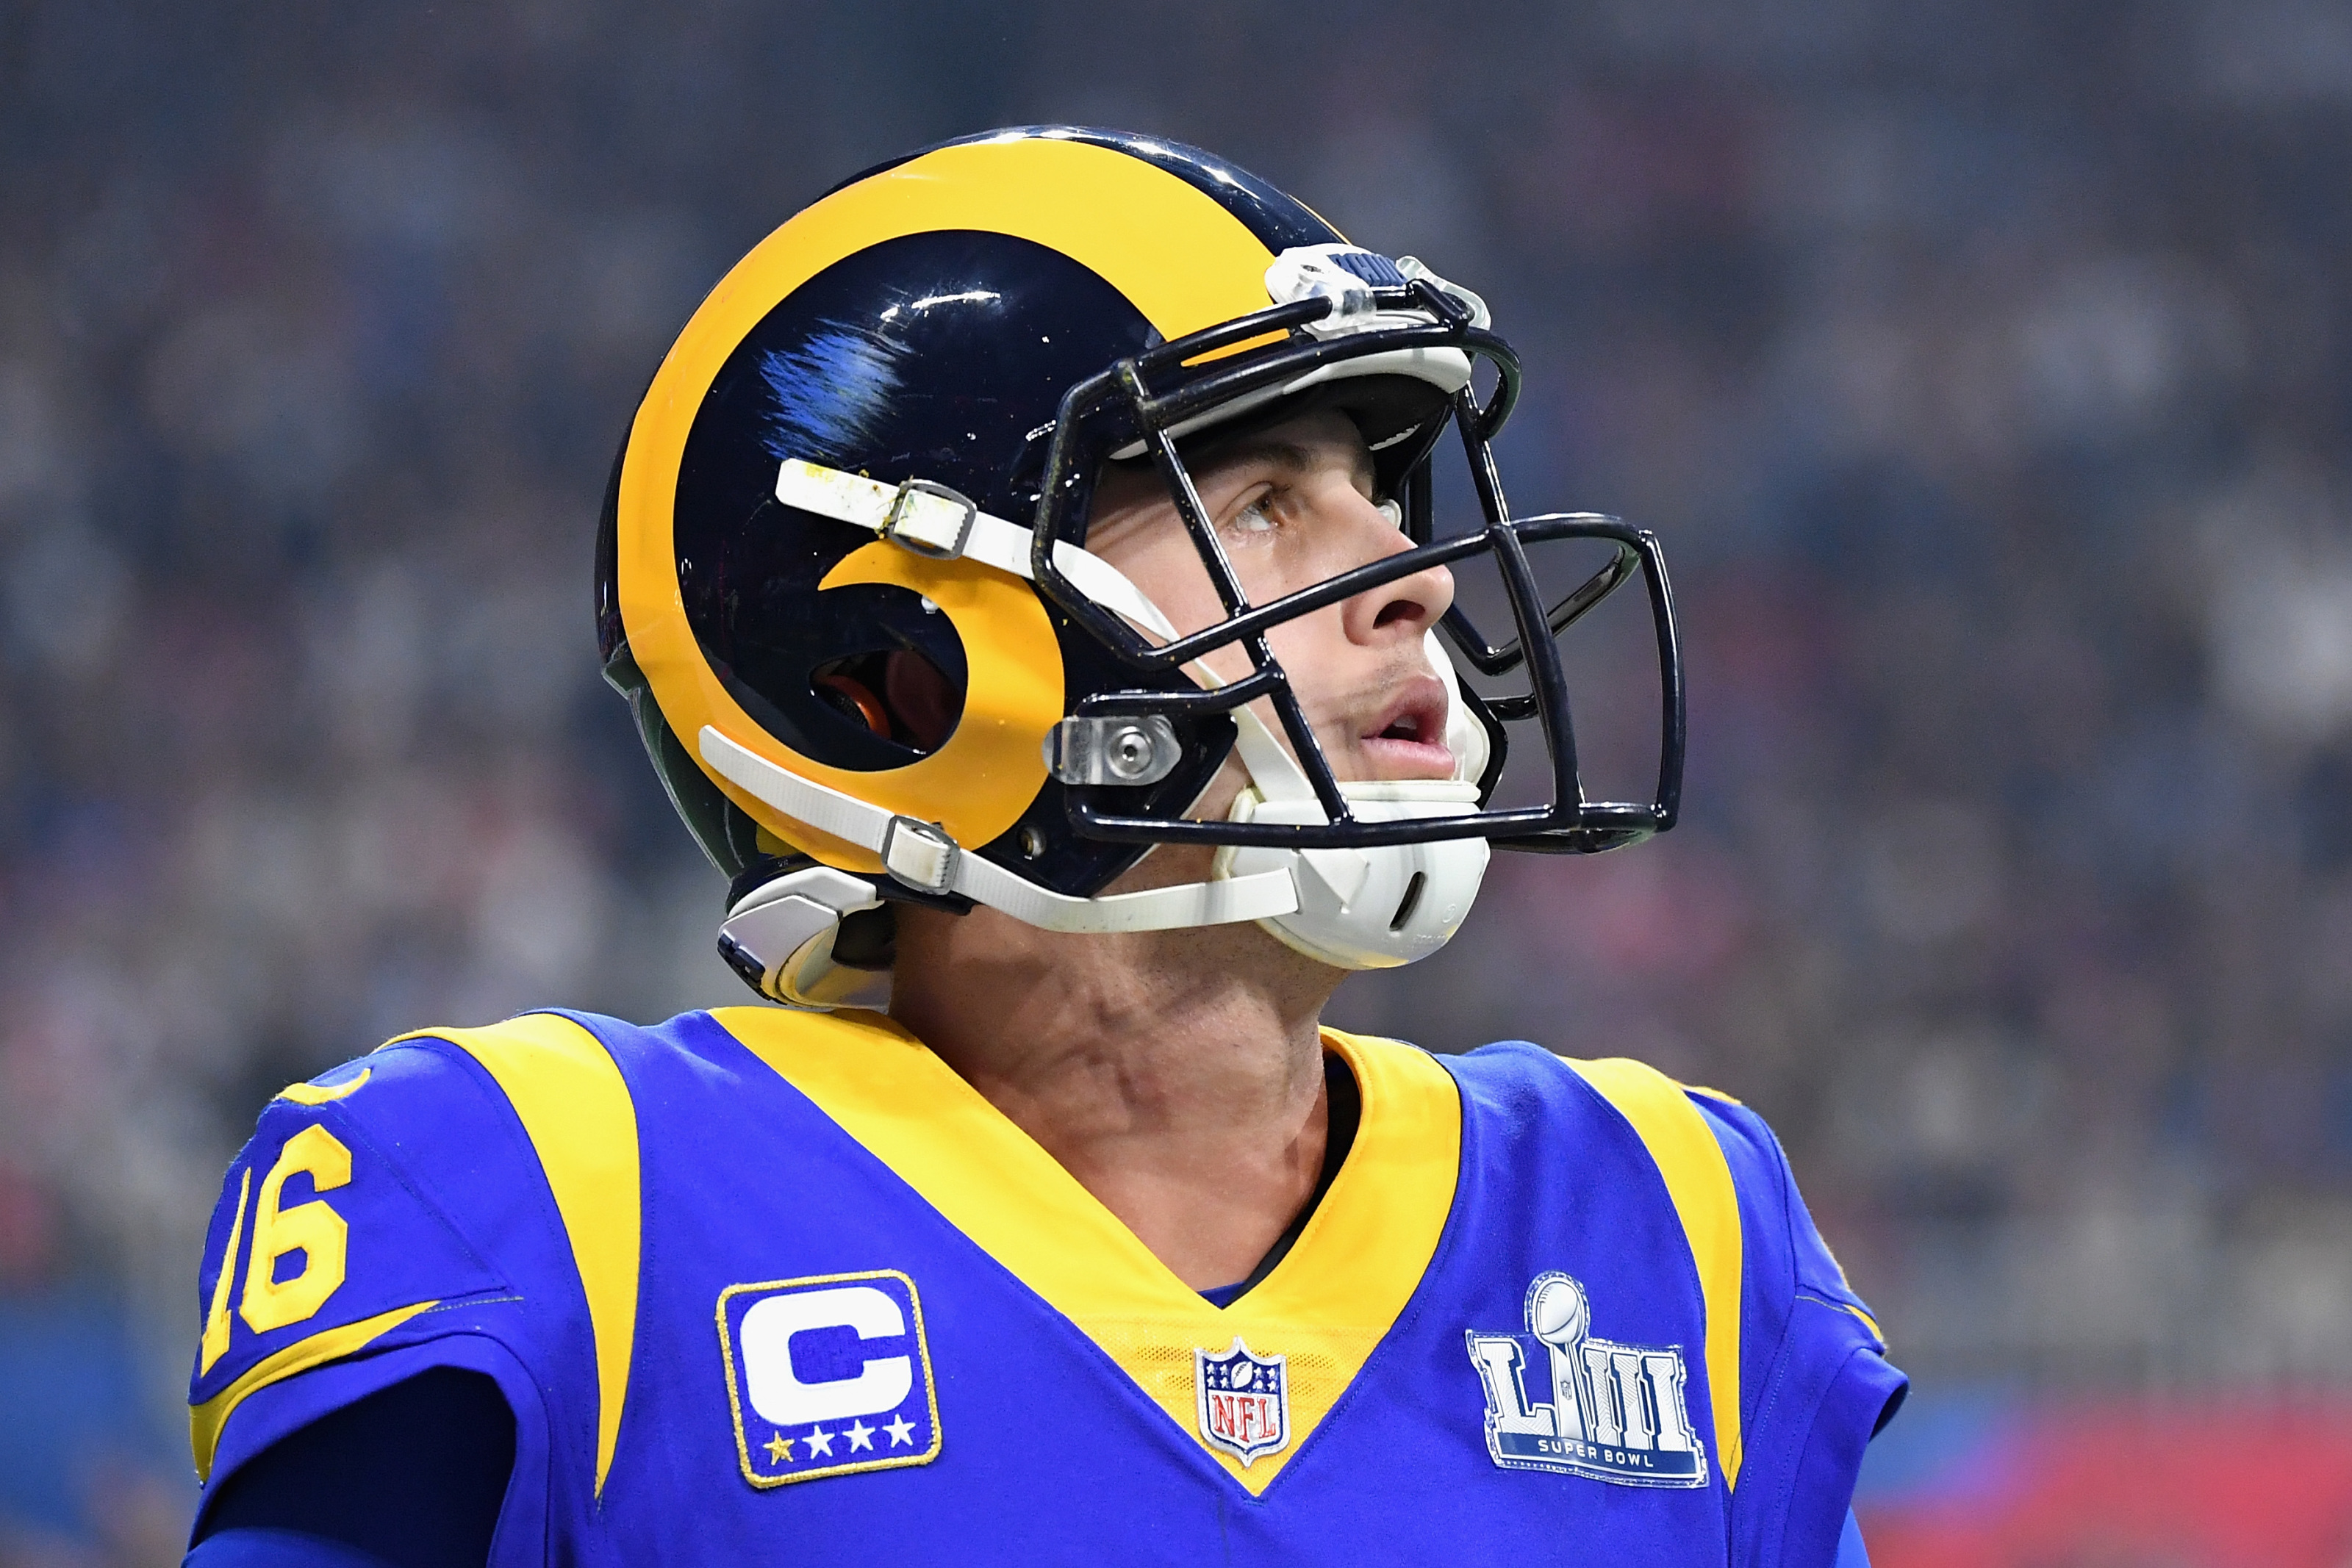 Jared Goff sounds pretty excited to be off the Rams